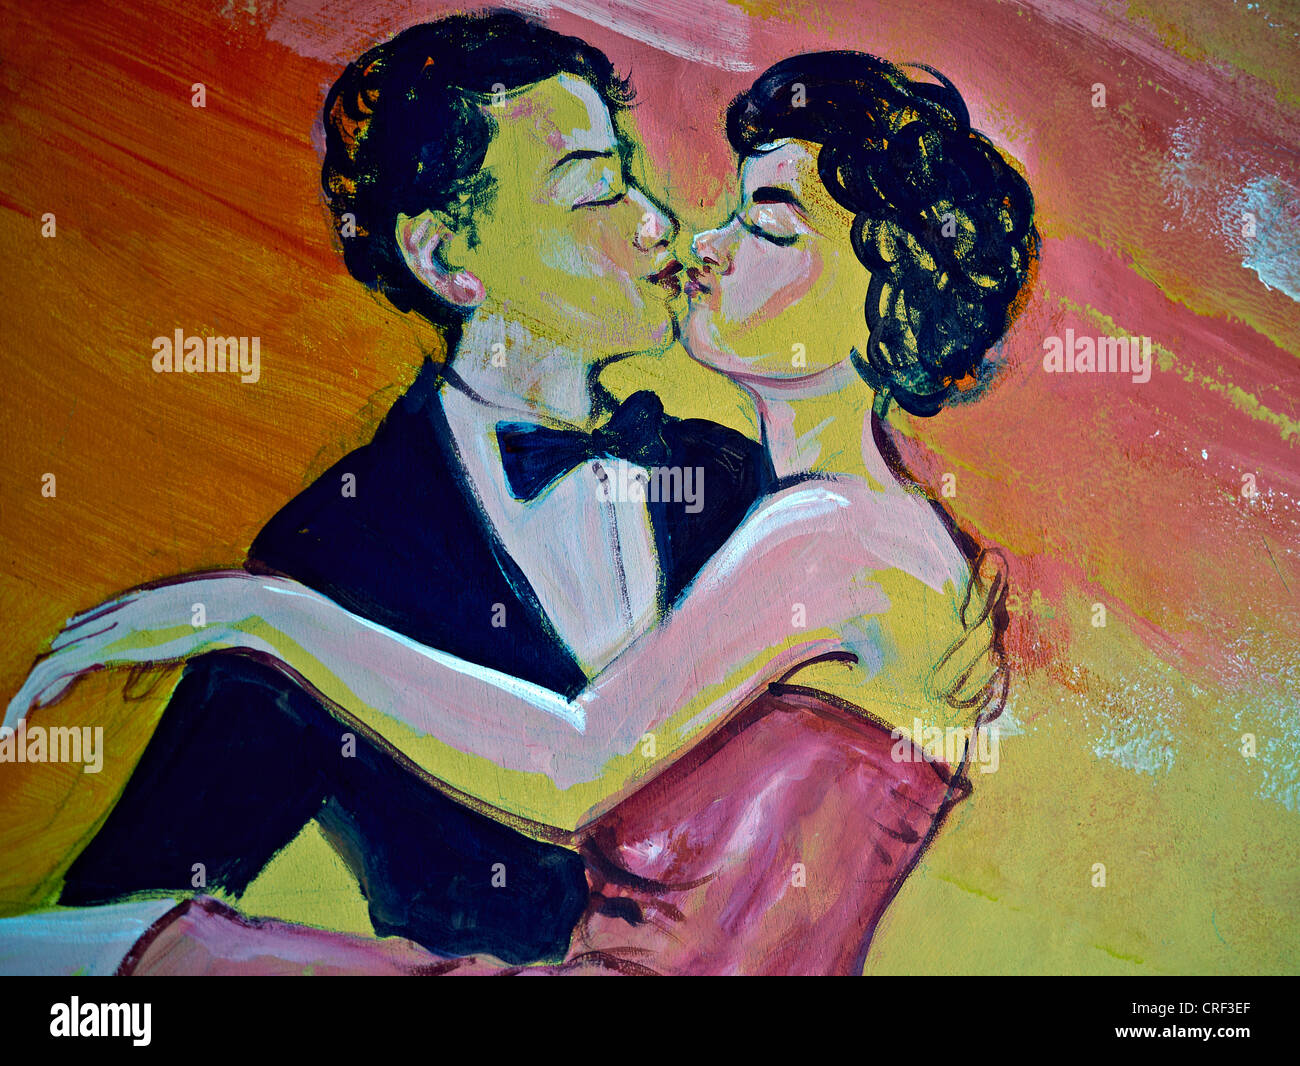 Pop art painting of a boy and girl kissing. c. 1950's. Thailand S.E. Asia Stock Photo